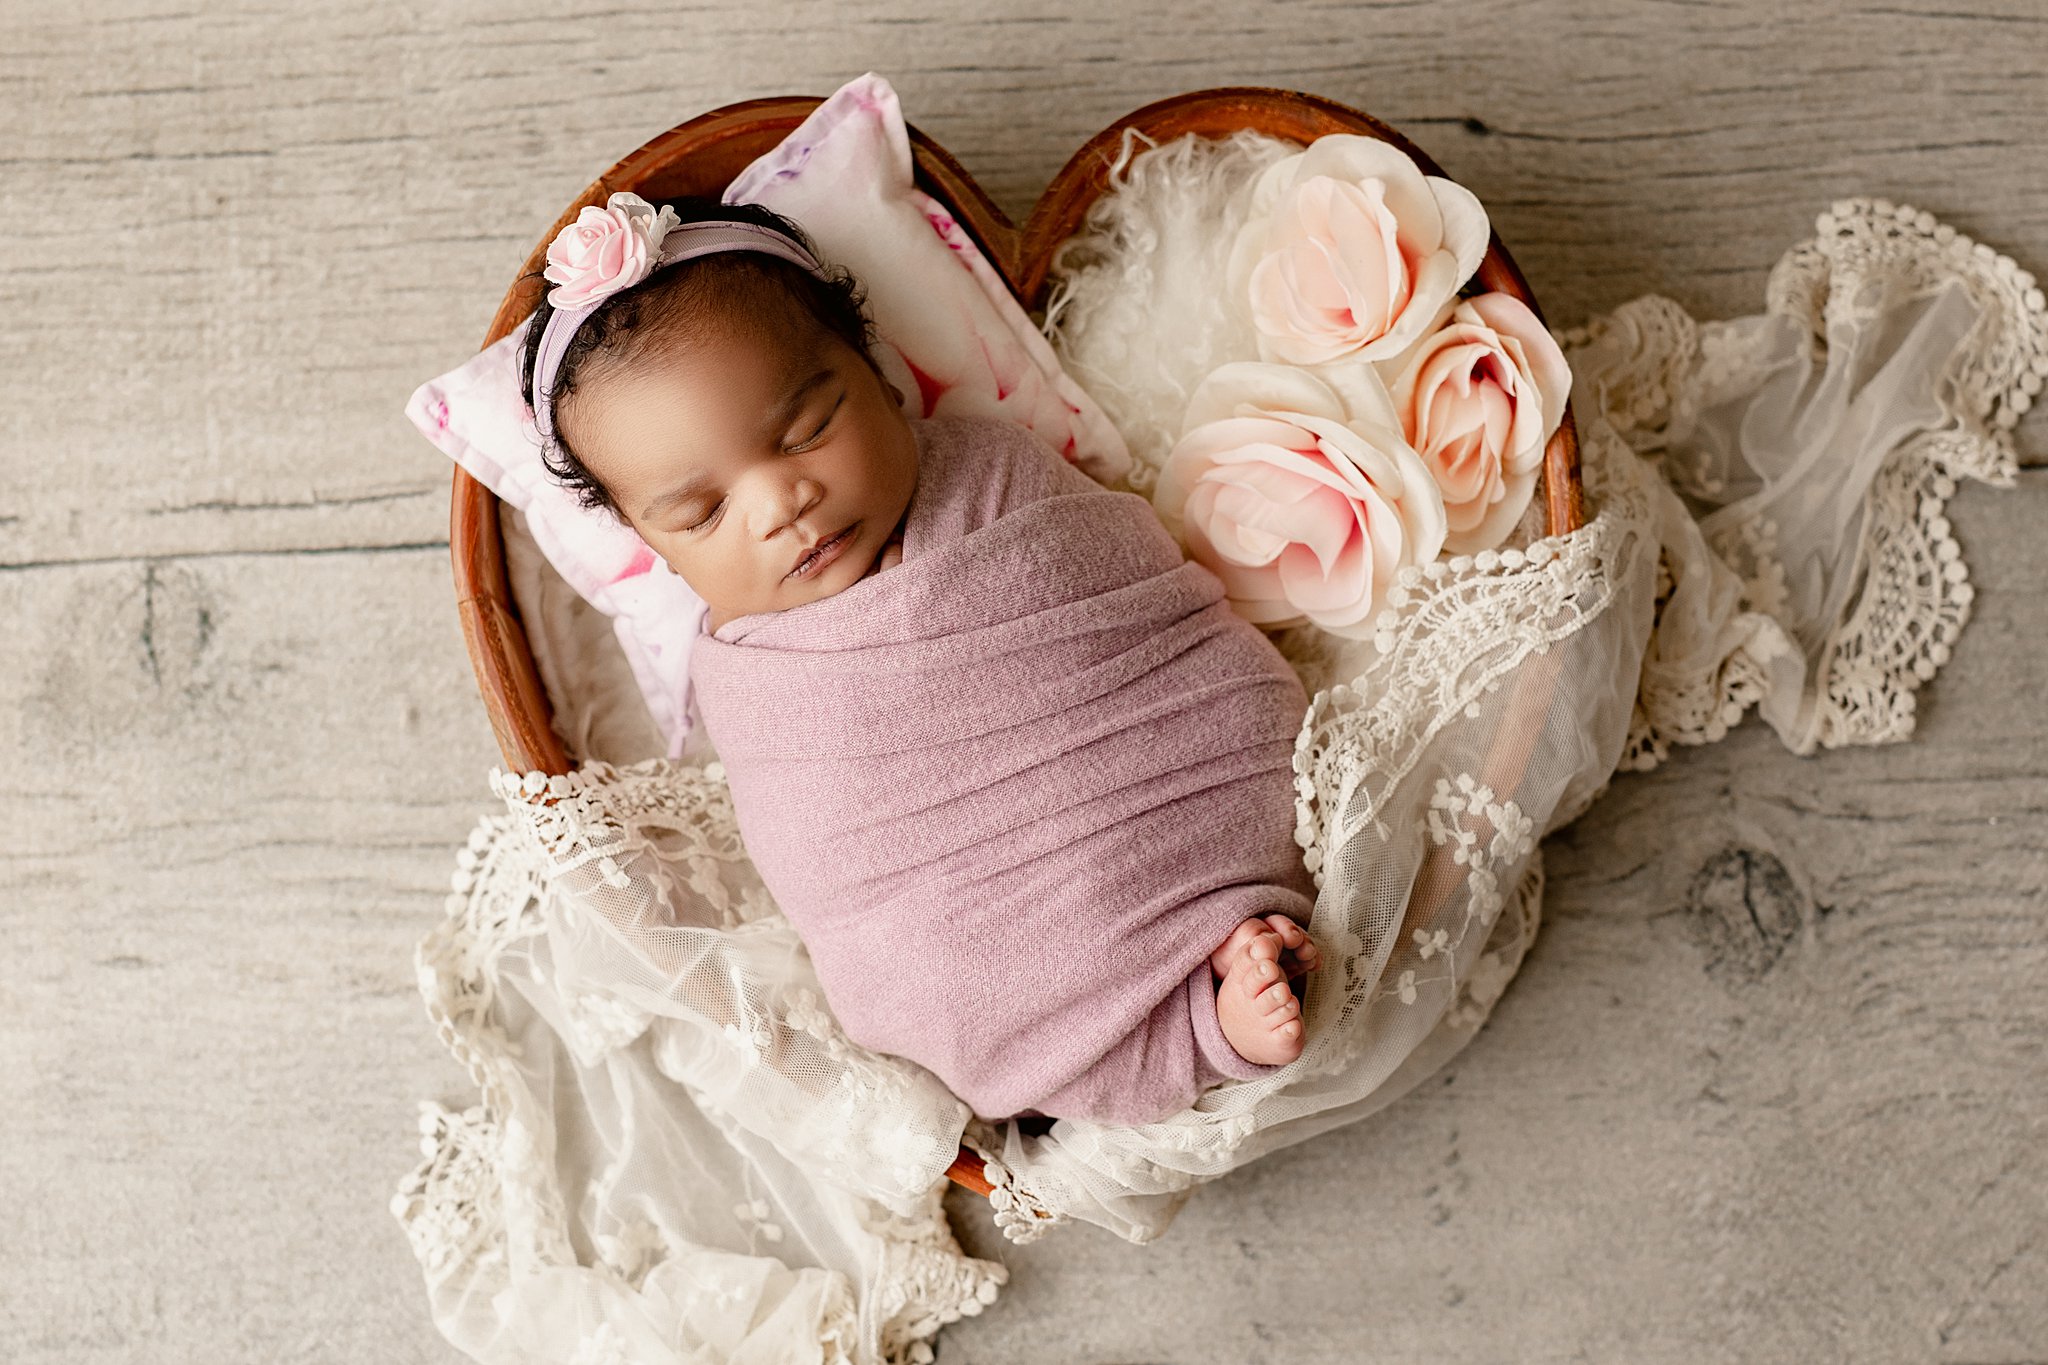 newborn baby girl wrapped in pink laying in a heart bowl waukesha obgyn